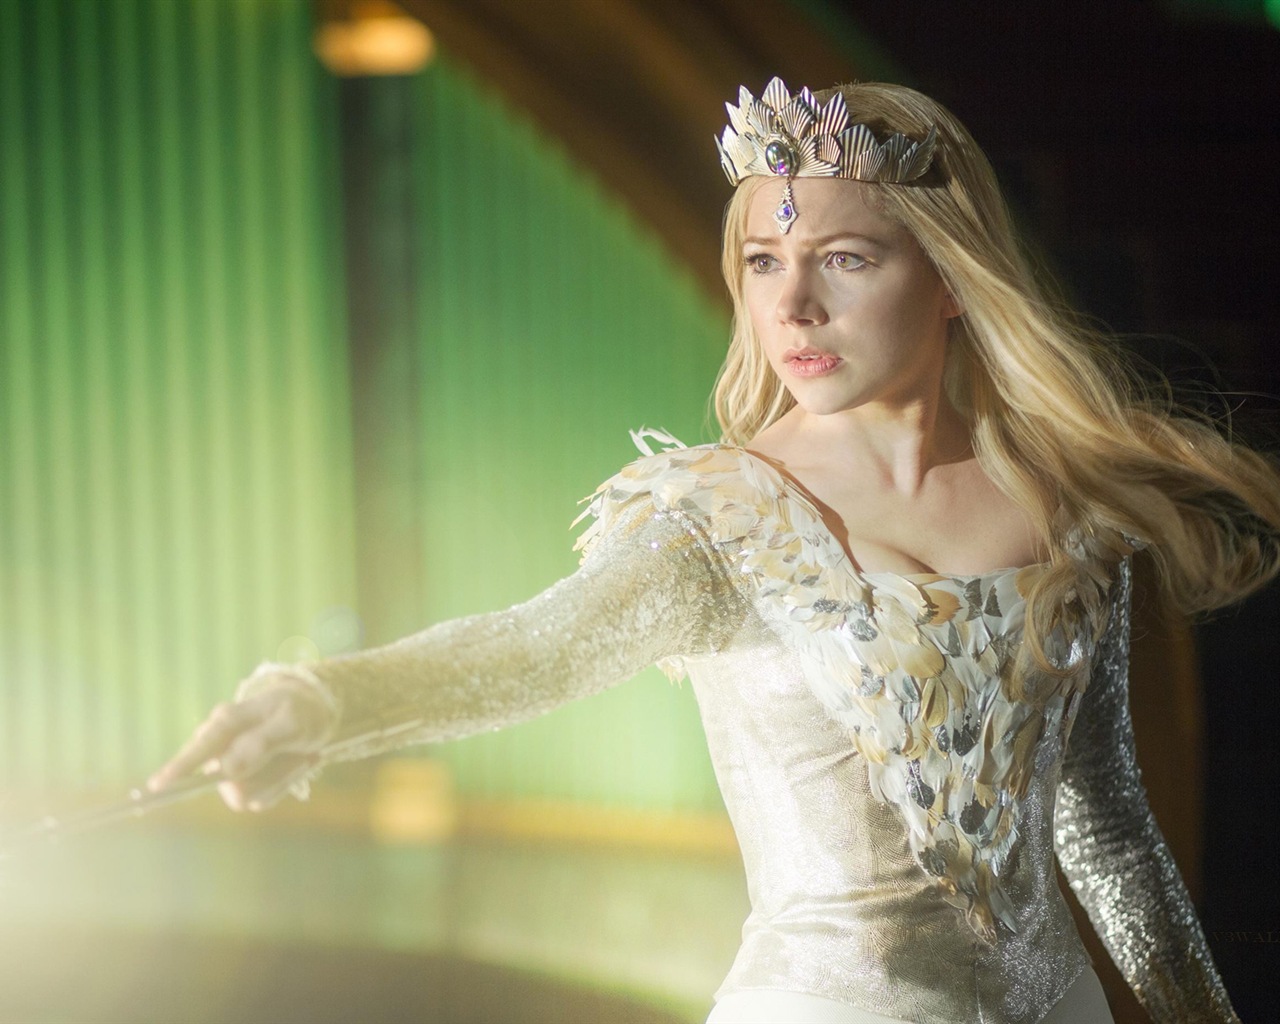 Oz The Great and Powerful 2013 HD wallpapers #5 - 1280x1024